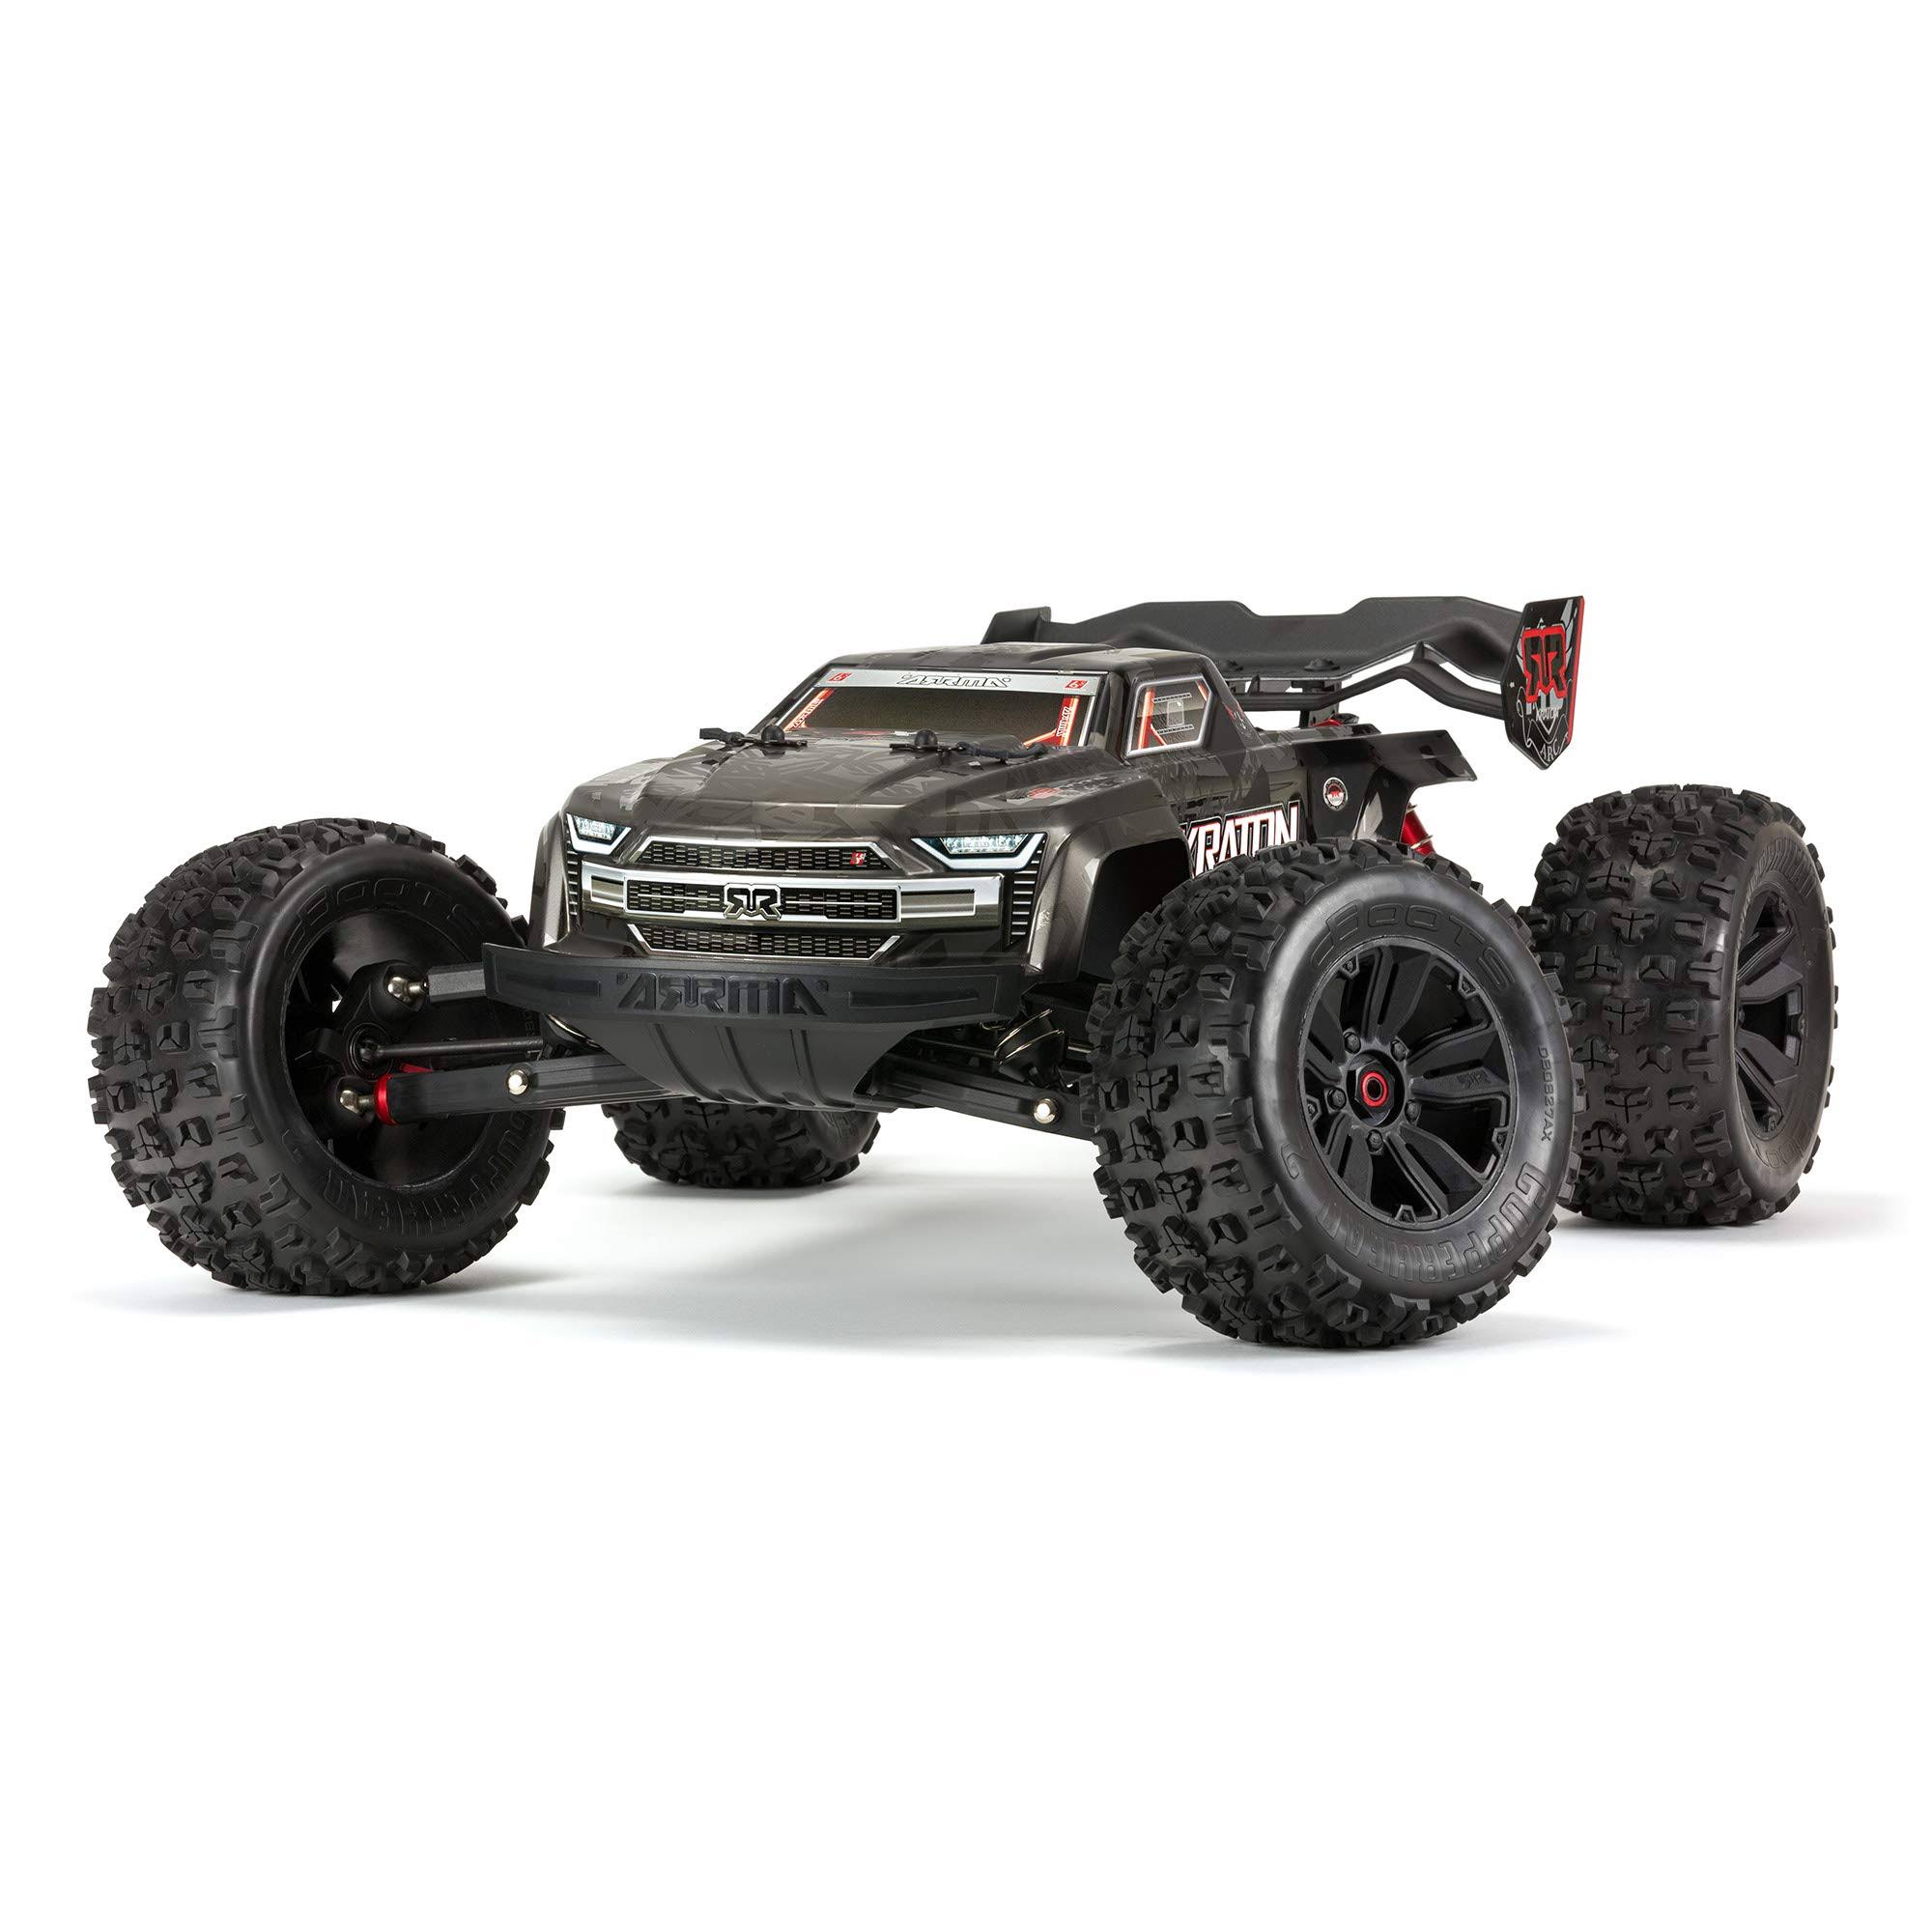 Arrma Kraton Extreme Bash 1/8 Monster Truck, Rolling Chassis - ARA106053